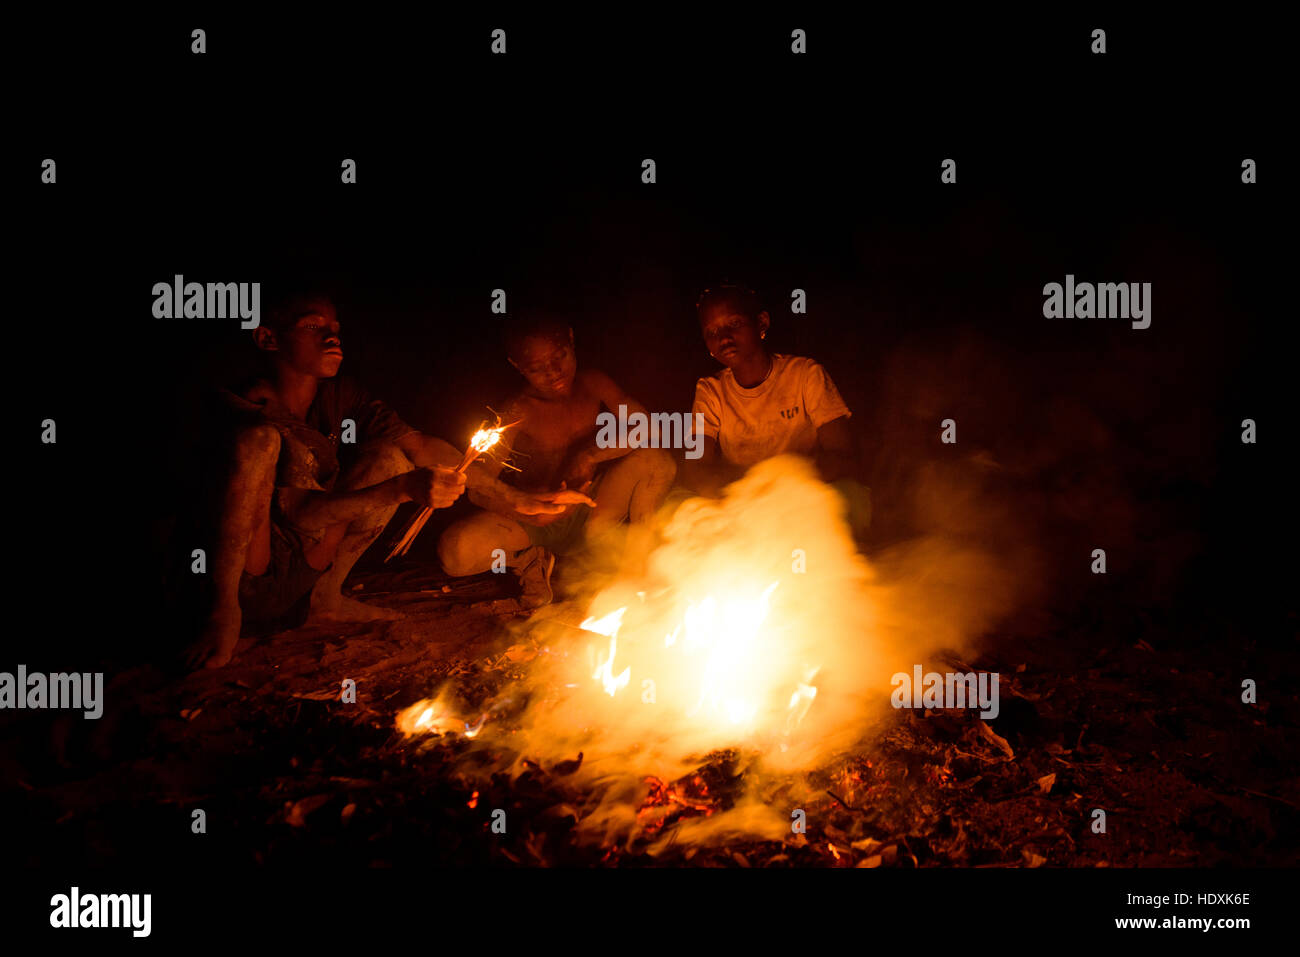 Village Nightlife in rural Cote D'Ivoire (Ivory Coast) Stock Photo